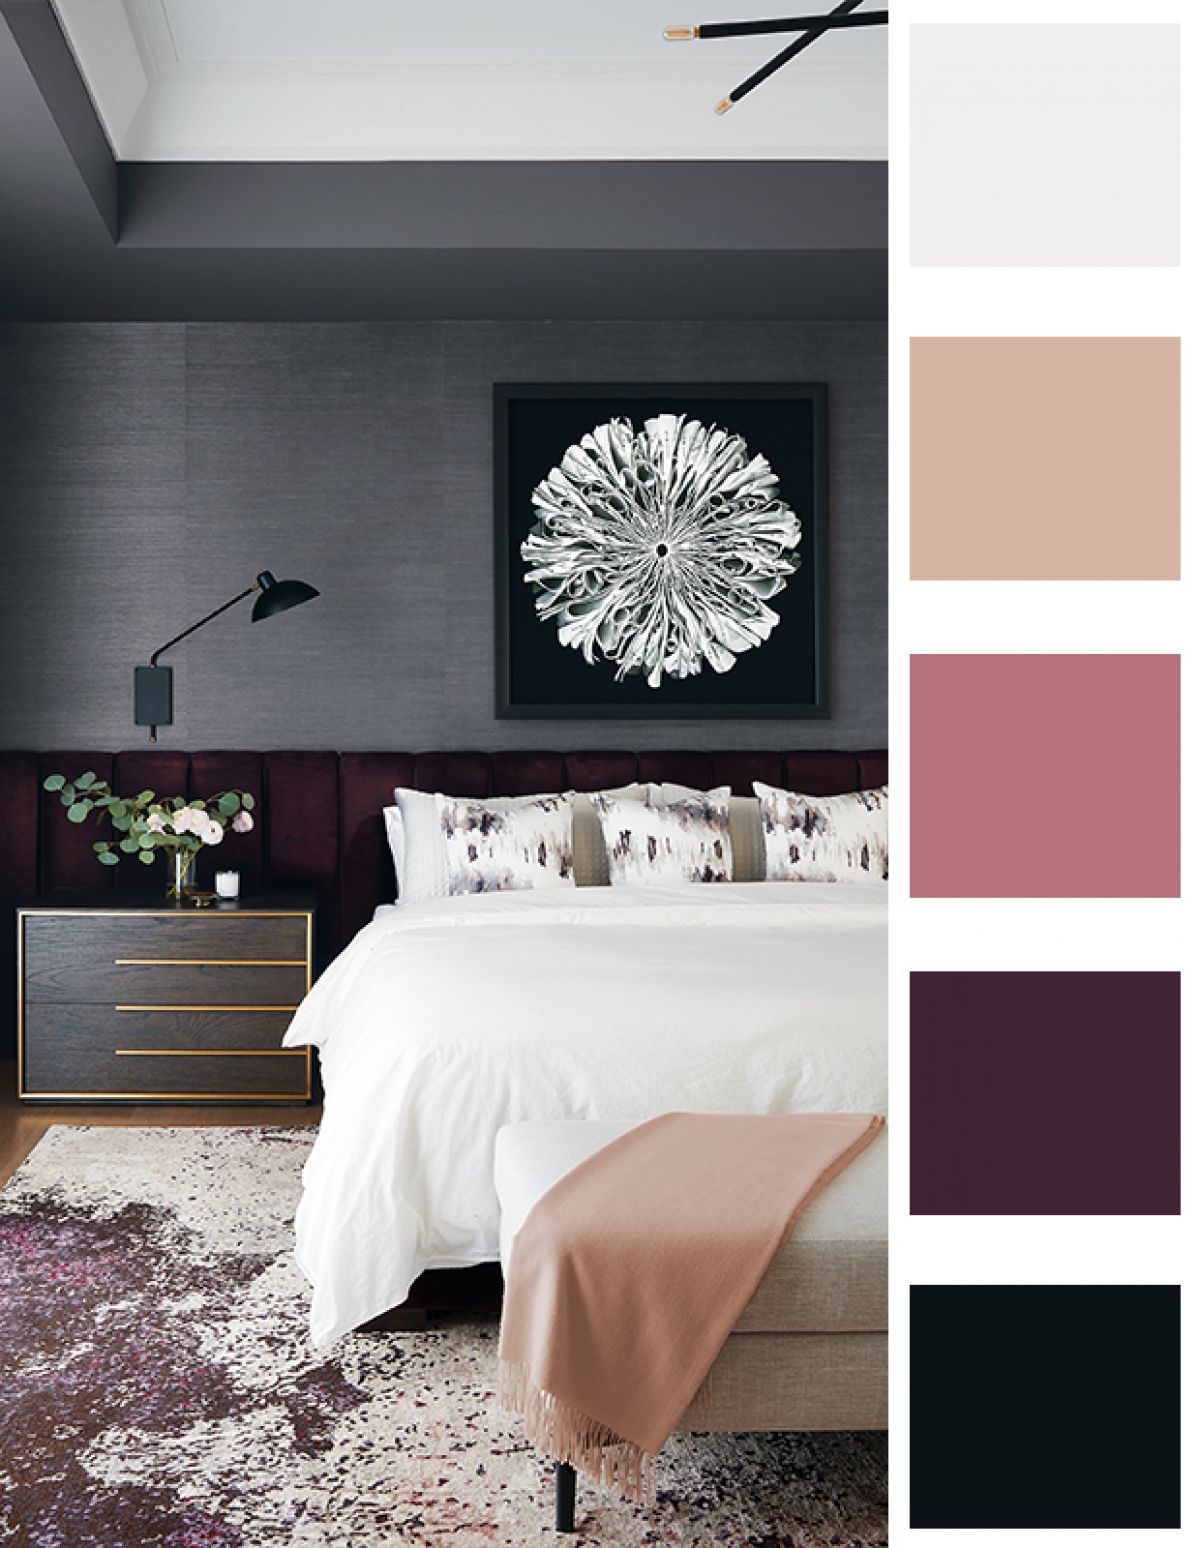 Plum and peach colors are popular color trends.